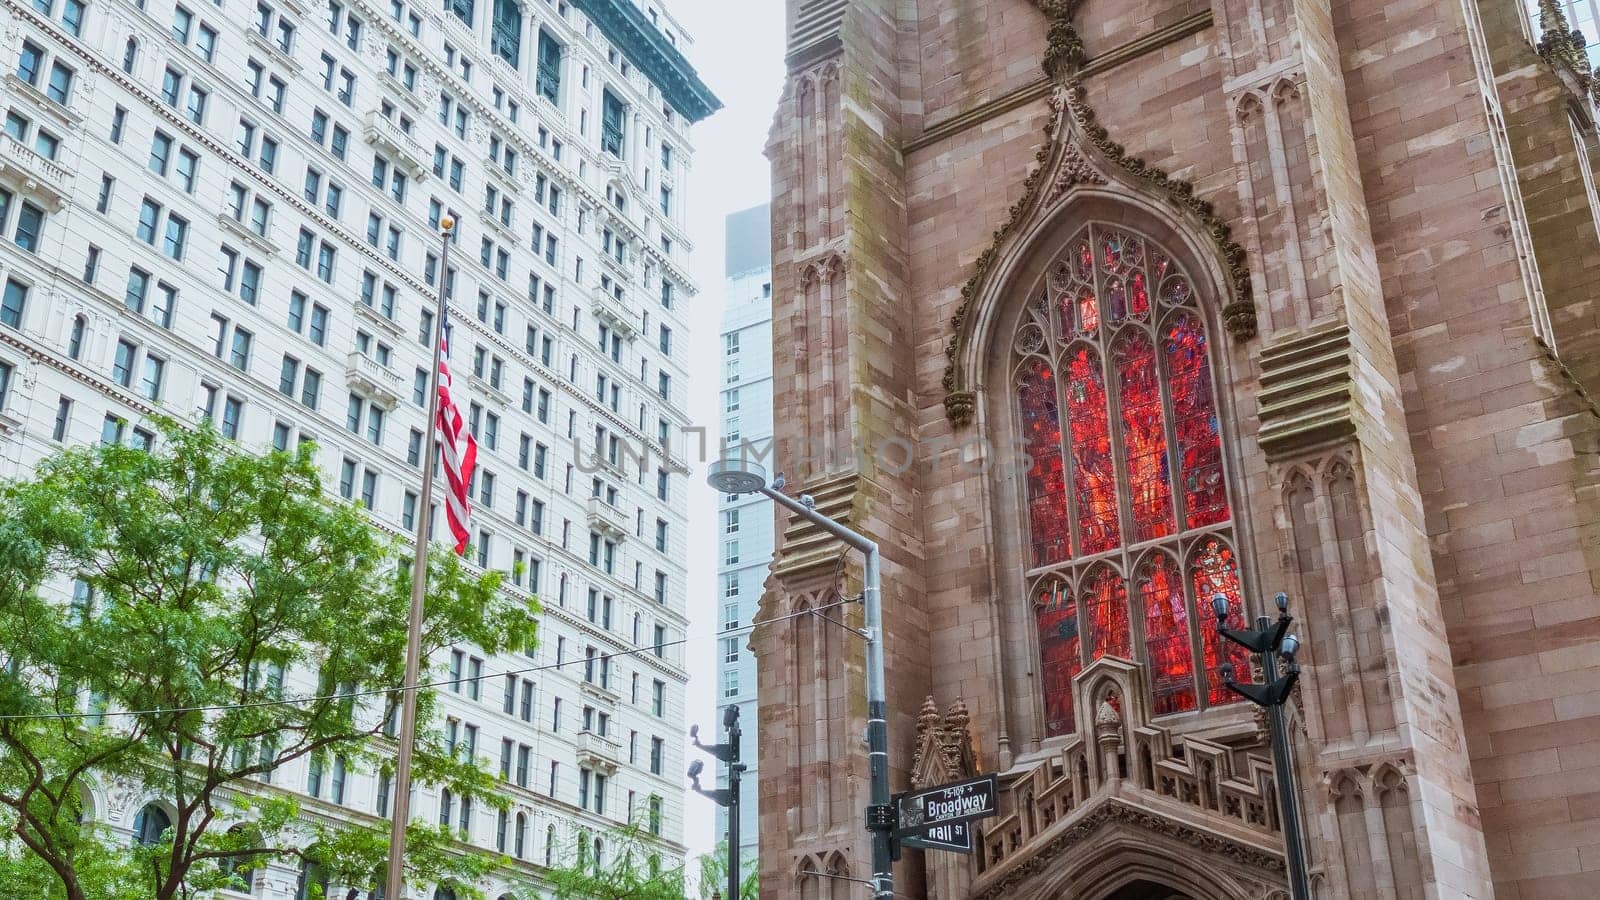 Iconic Trinity Church in Manhattan, New York City, showcases stunning Gothic Revival architecture blending history with modernity in the bustling cityscape, a captivating view.